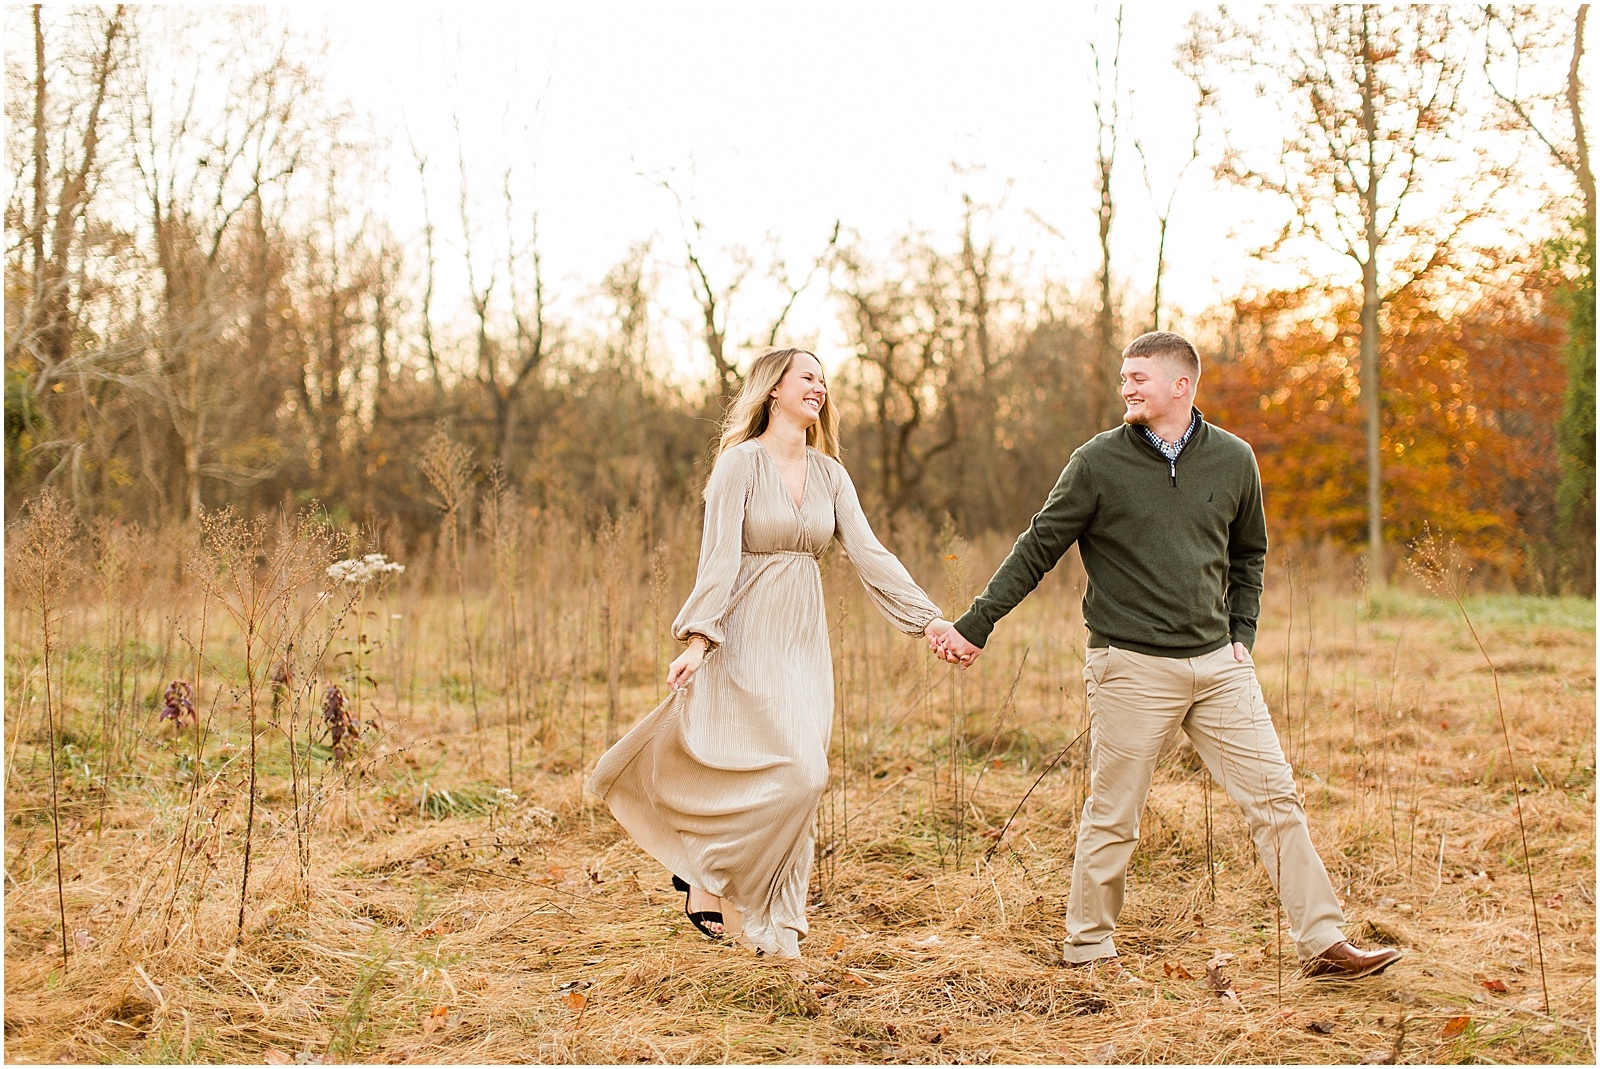 A Fall Southern Indiana Engagement Seesion | Cody and Hannah | Bret and Brandie Photography 052.jpg